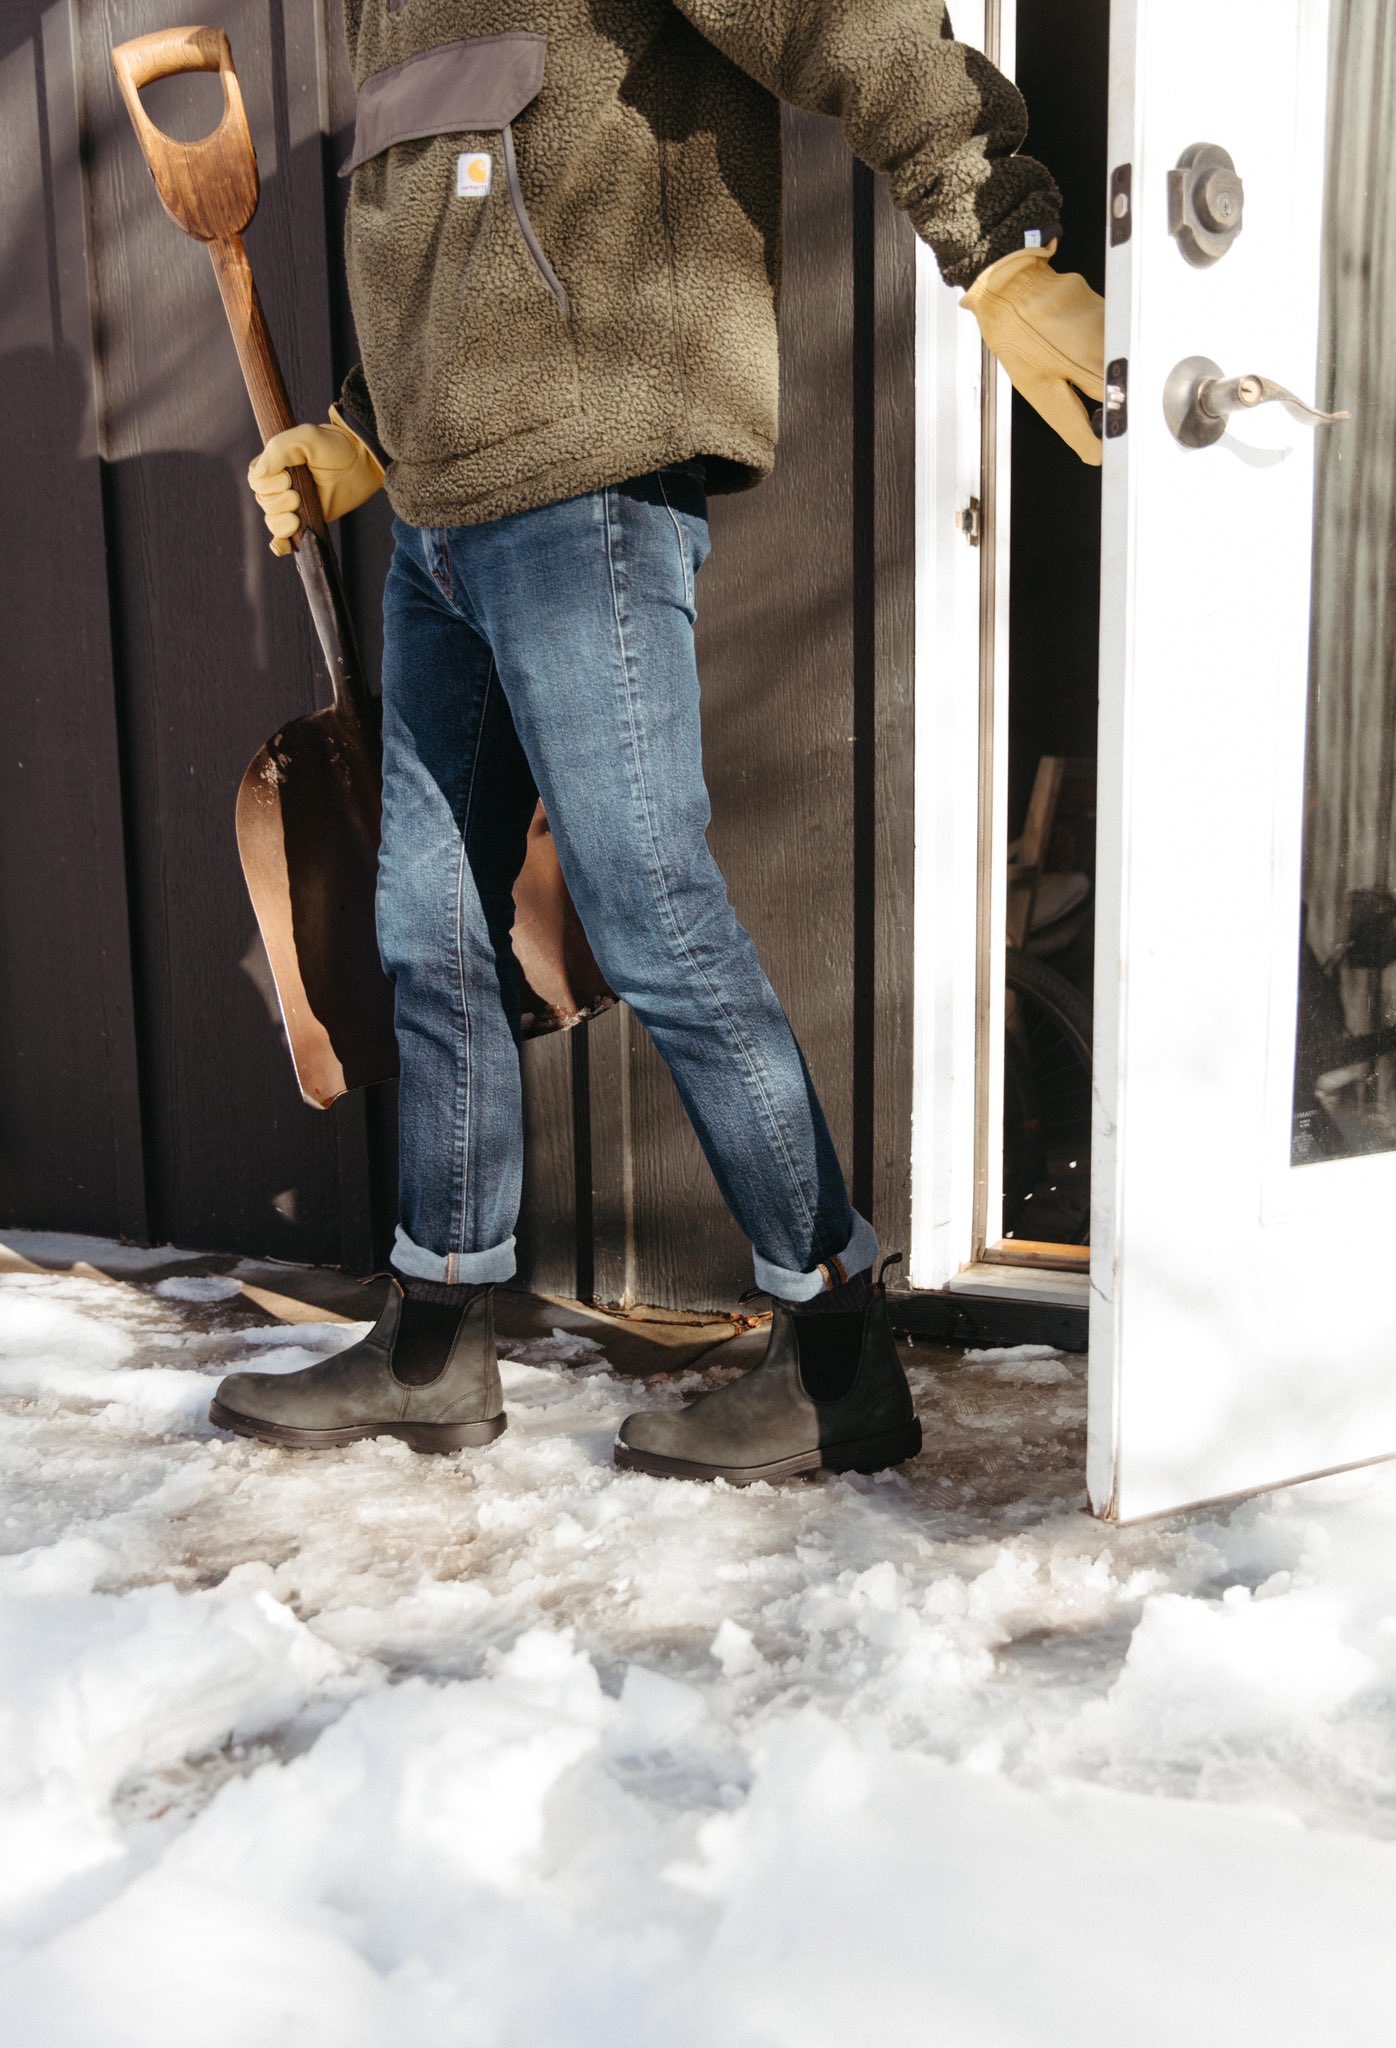 Blundstone USA på X: "Sunday Snow-shoveling in style 🖤 Featuring our Men's Classic Chelsea in Rustic Black, #587 #Blundstone #blundstoneboots # chelseaboots https://t.co/nm3g35Lguc" / X